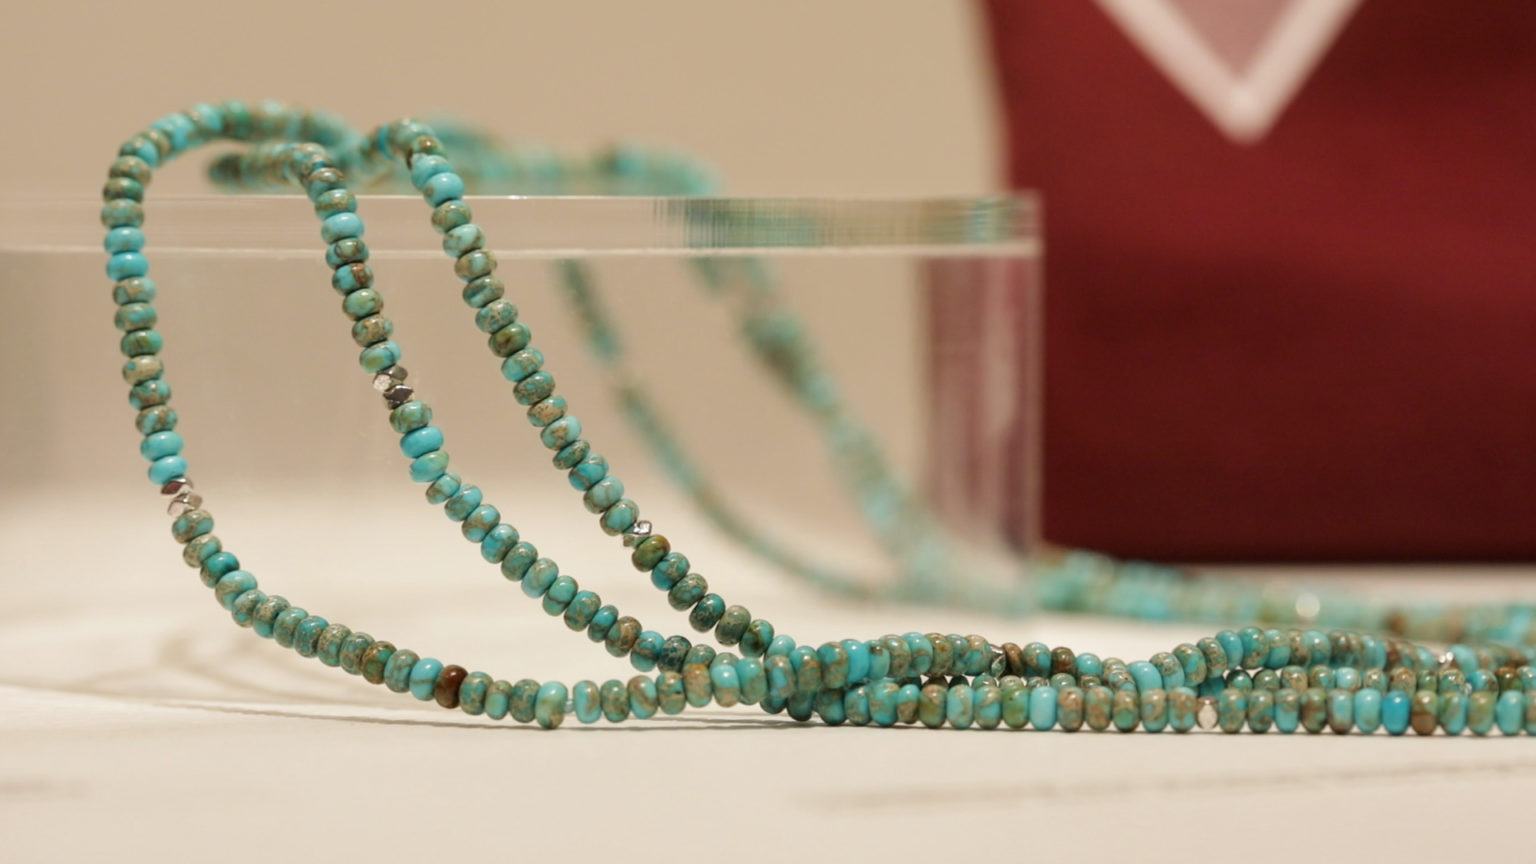 Several strands of turquoise beads on a transparent pedestal